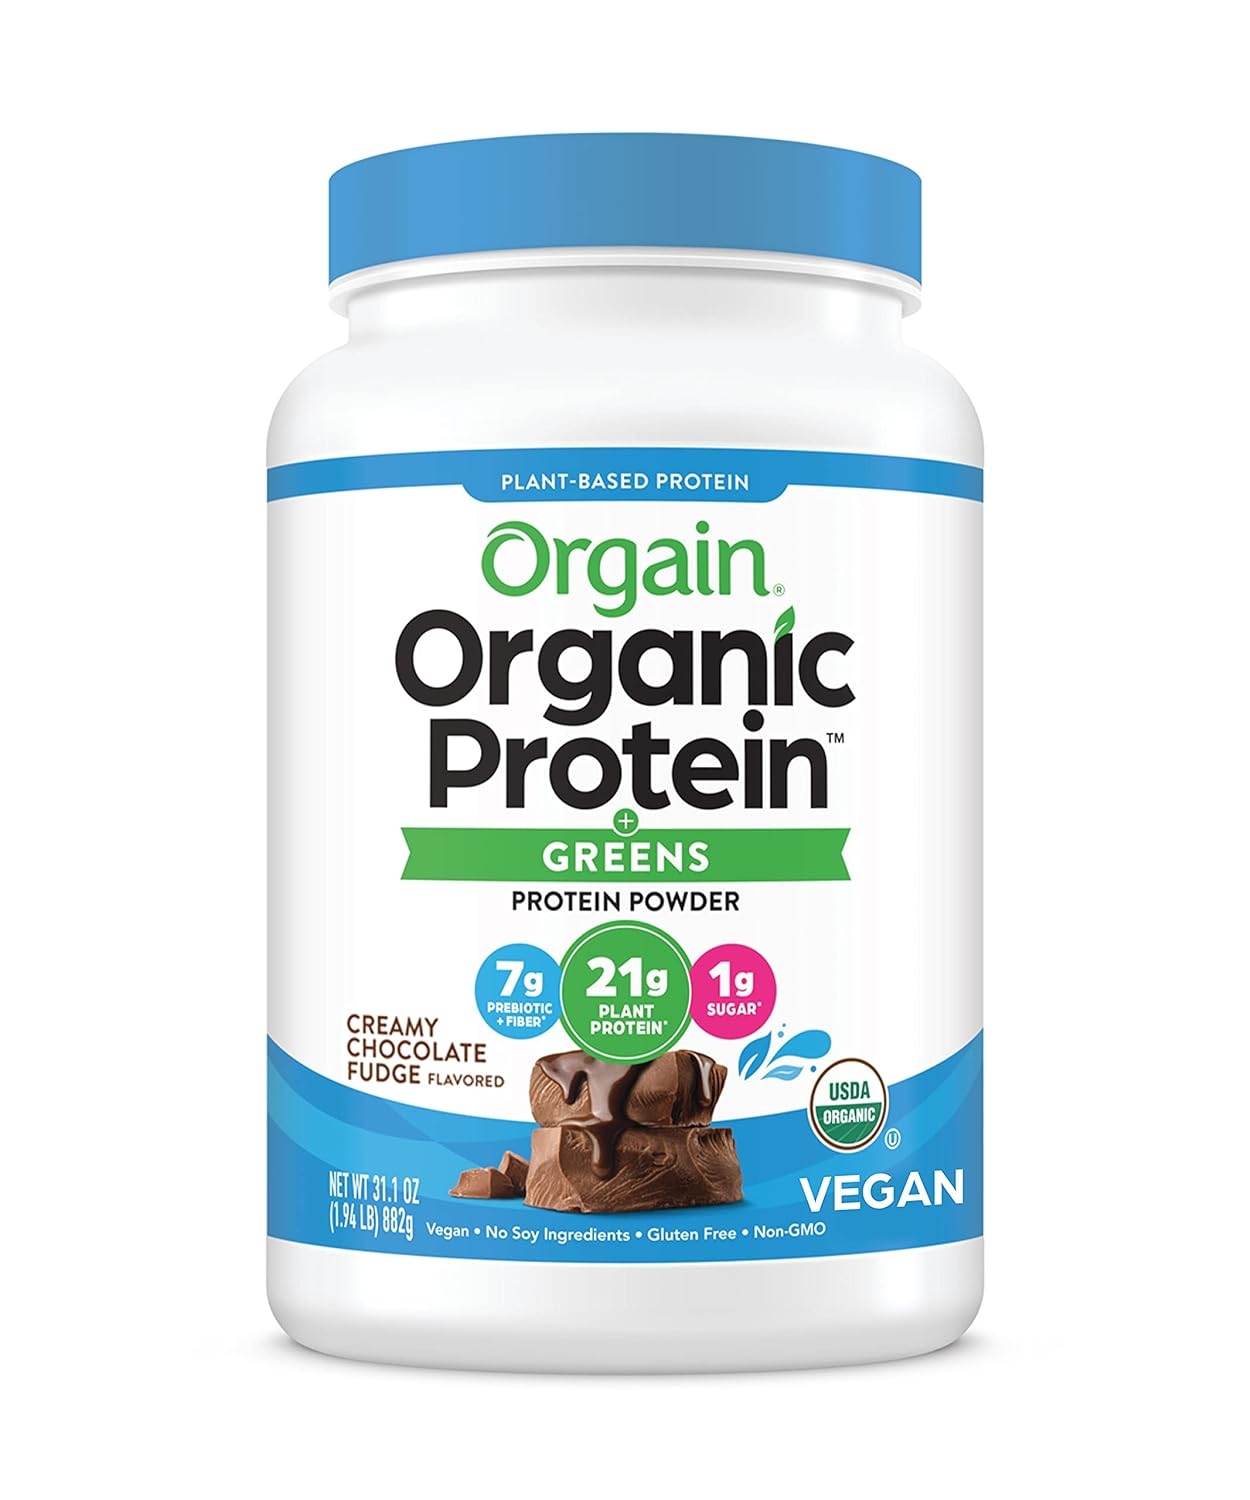 Orgain Organic Protein & Greens Plant Based Protein Powder, Creamy Chocolate Fudge - 21g of Protein, Vegan, Gluten Free, Non-GMO, 1.94 Lb, 1 Count (Packaging May Vary)